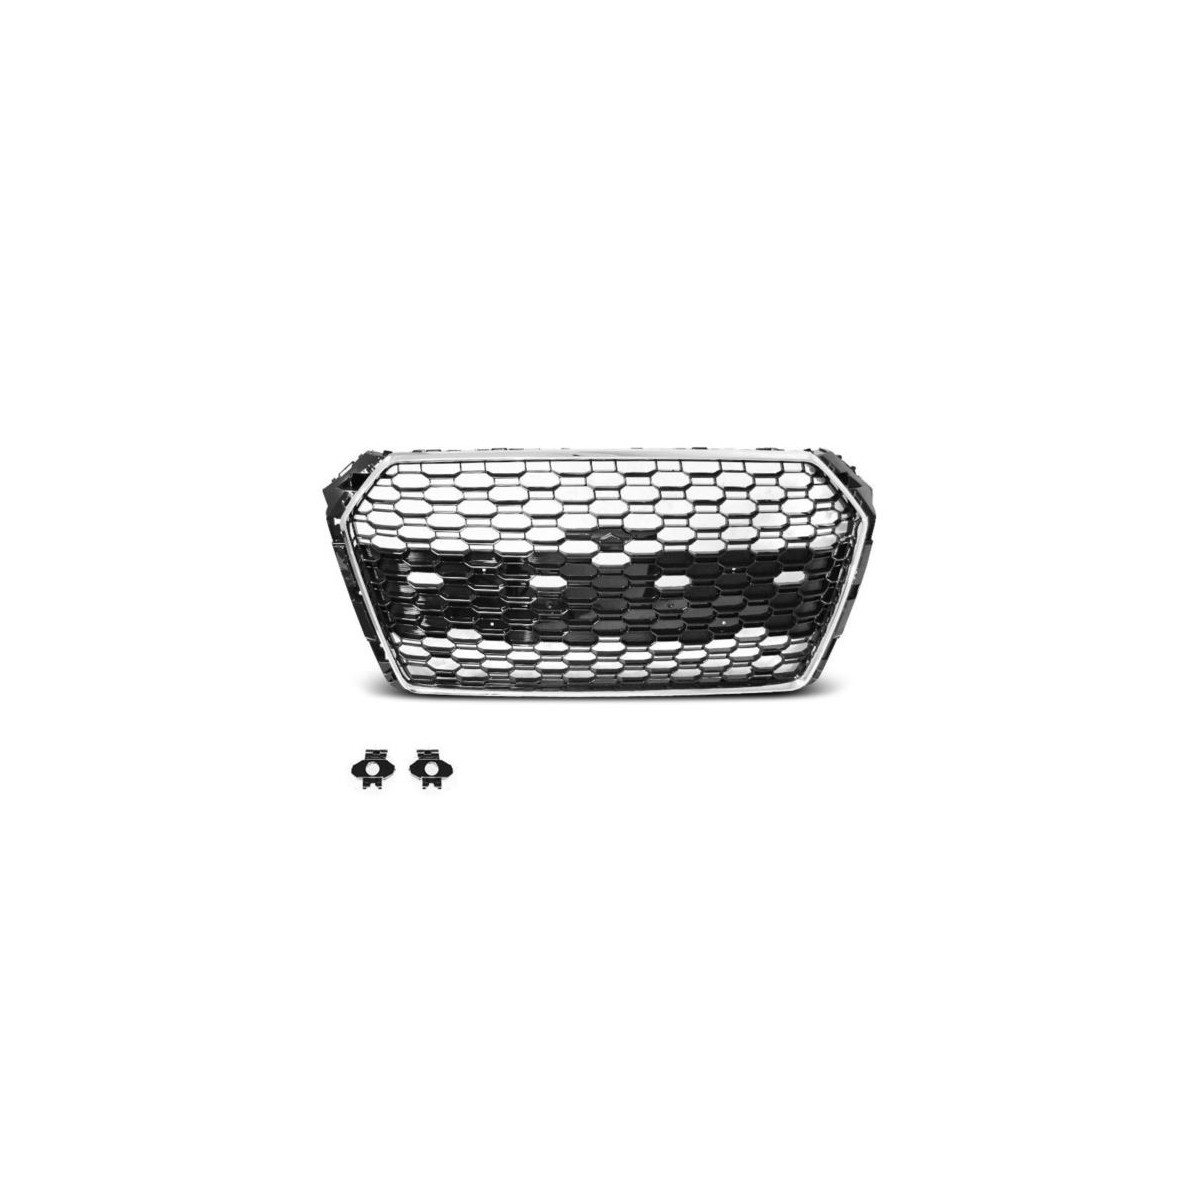 GRILL AUDI A4 B9 15-19 CHROME BLACK RS4 STYLE PDC